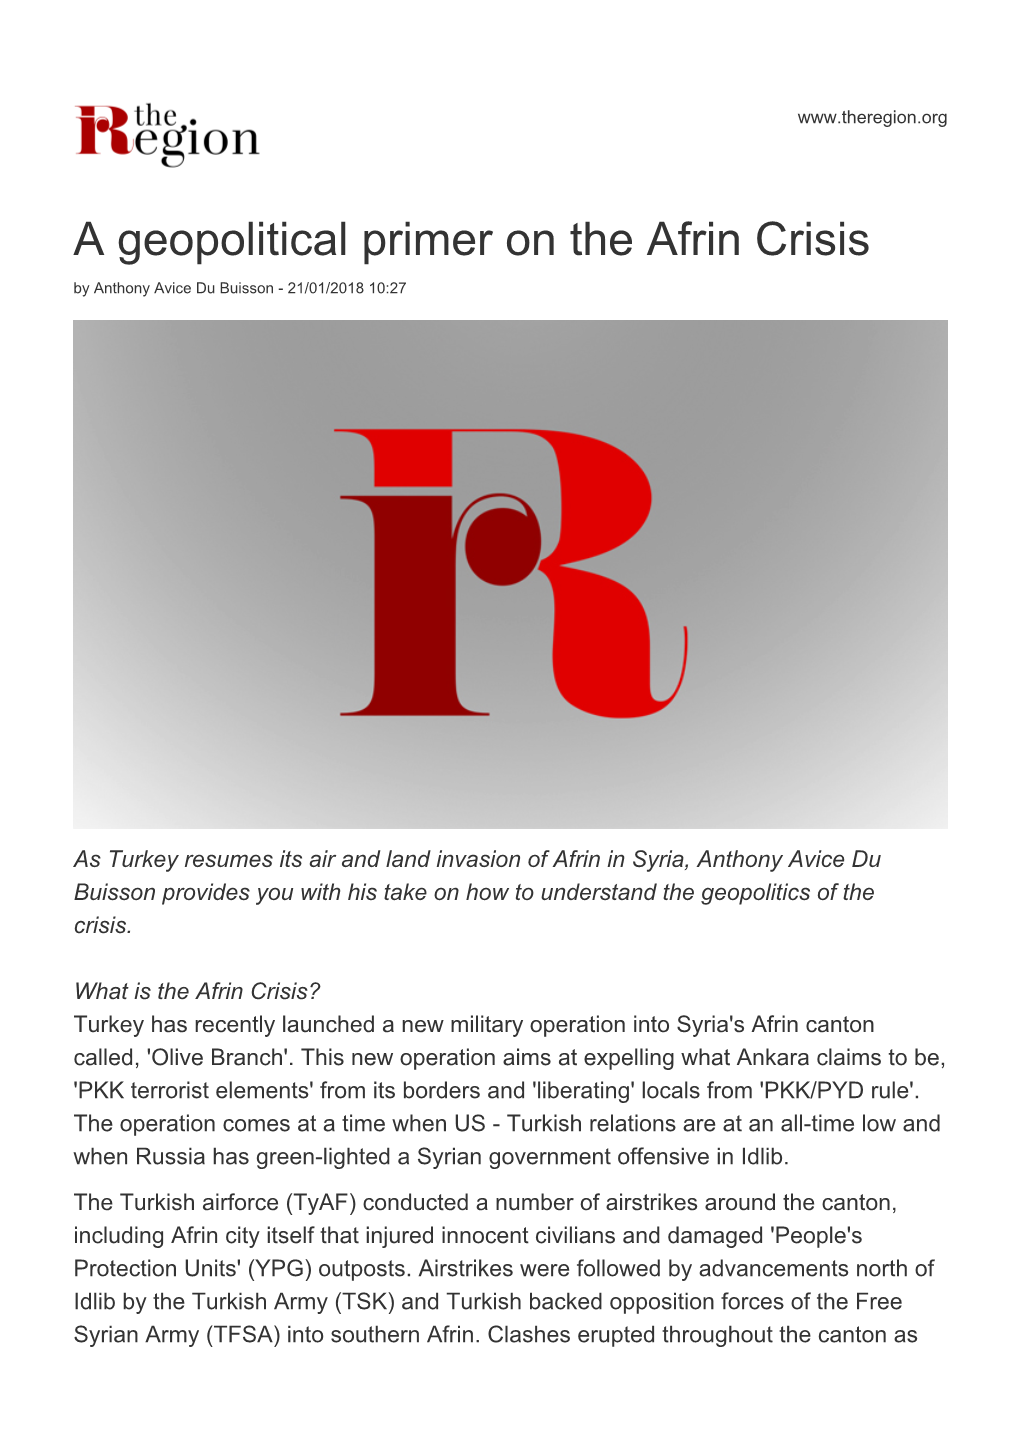 A Geopolitical Primer on the Afrin Crisis by Anthony Avice Du Buisson - 21/01/2018 10:27